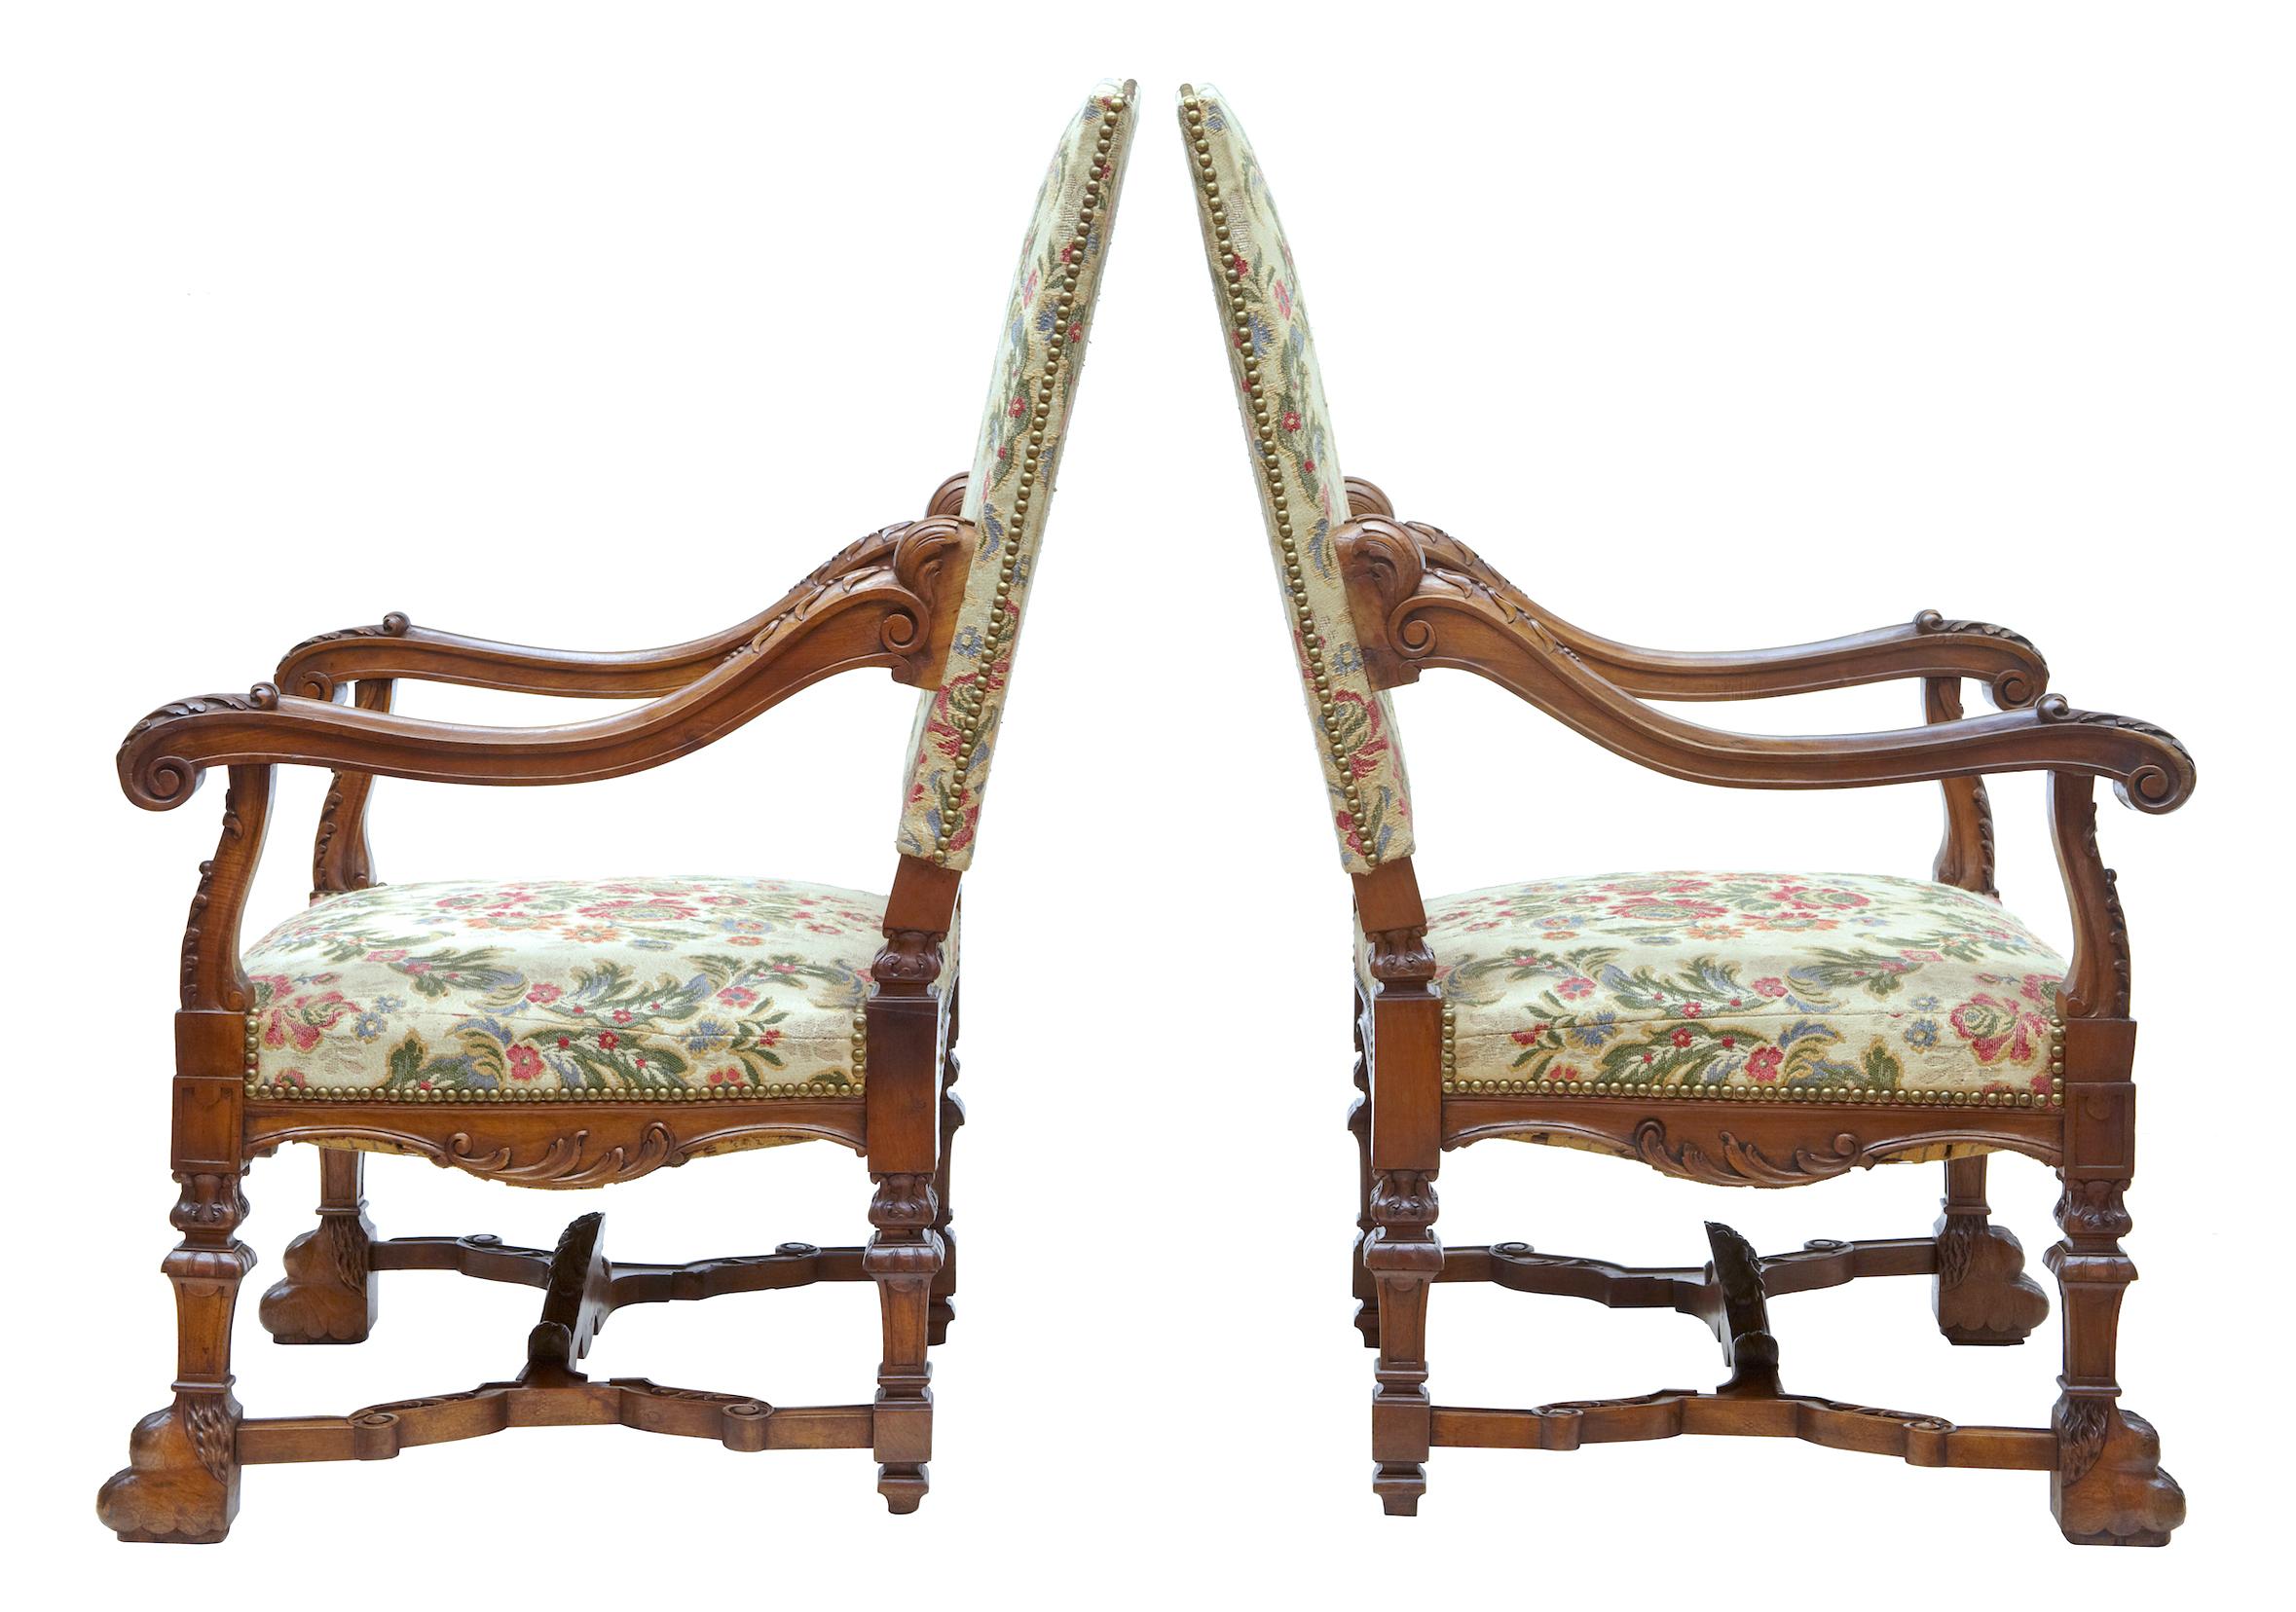 Superb pair of 19th century carved walnut French armchairs, circa 1870.

Finest quality pair of large French armchairs, circa 1870. Profusely carved with shells, florals and swags shaped arms which terminate in a scroll. Carved paw feet united by